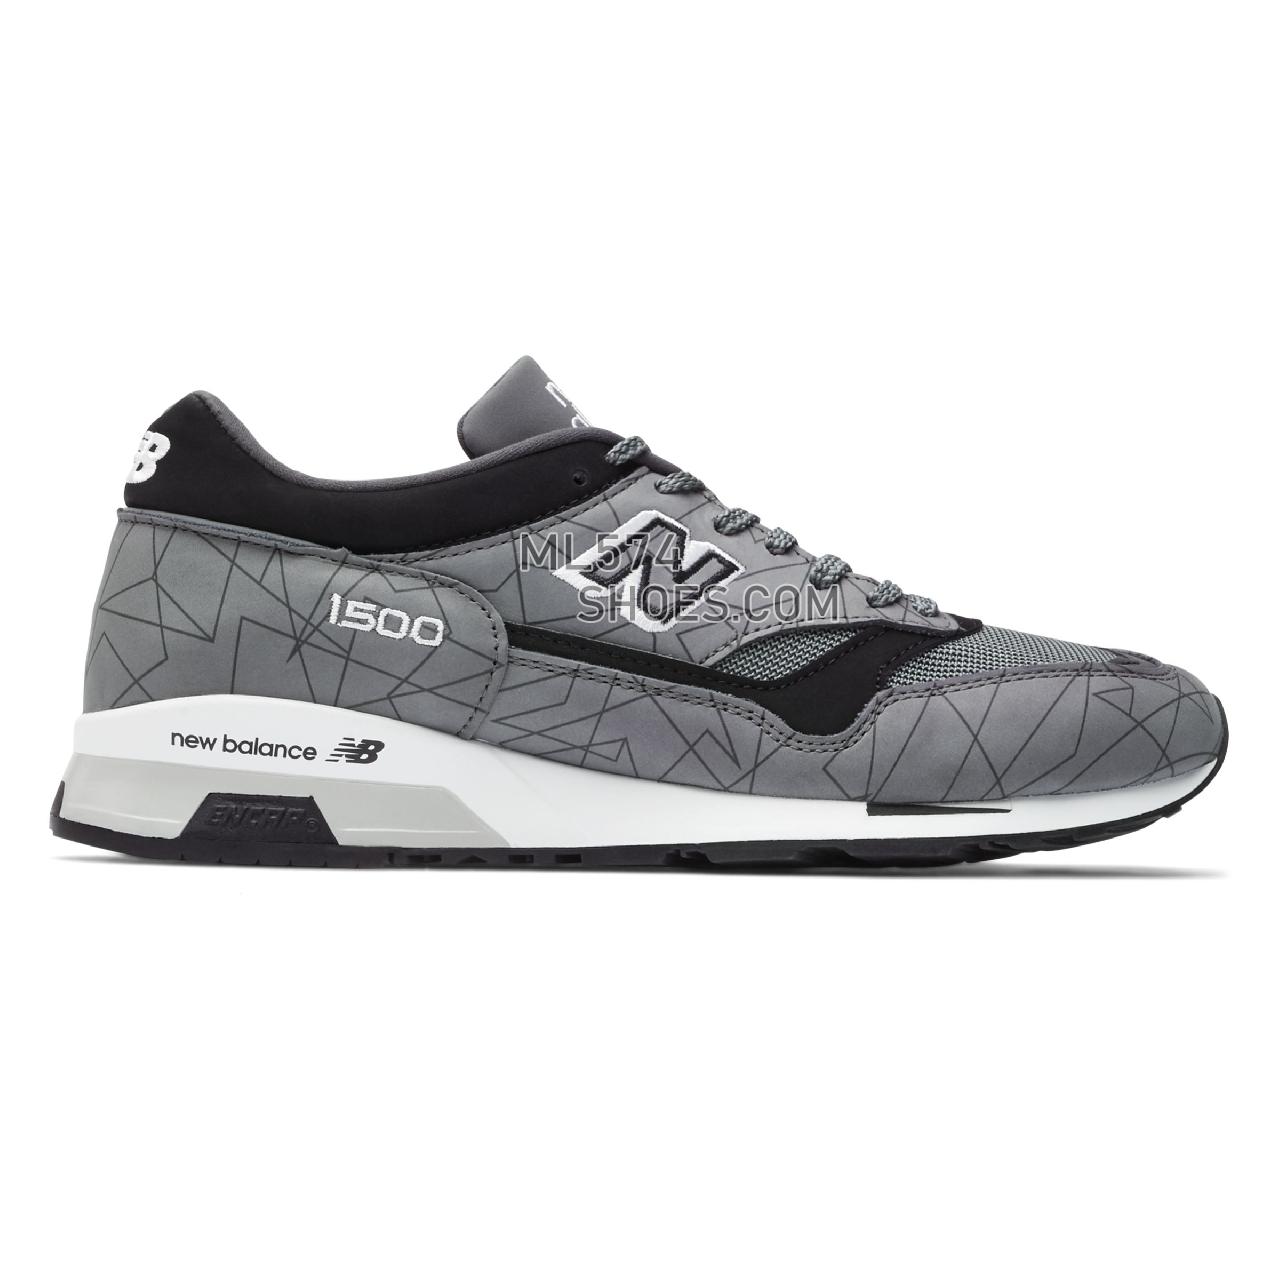 New Balance MADE in UK 1500 - Men's Made in USA And UK Sneakers - Black with White and Silver - M1500PNU